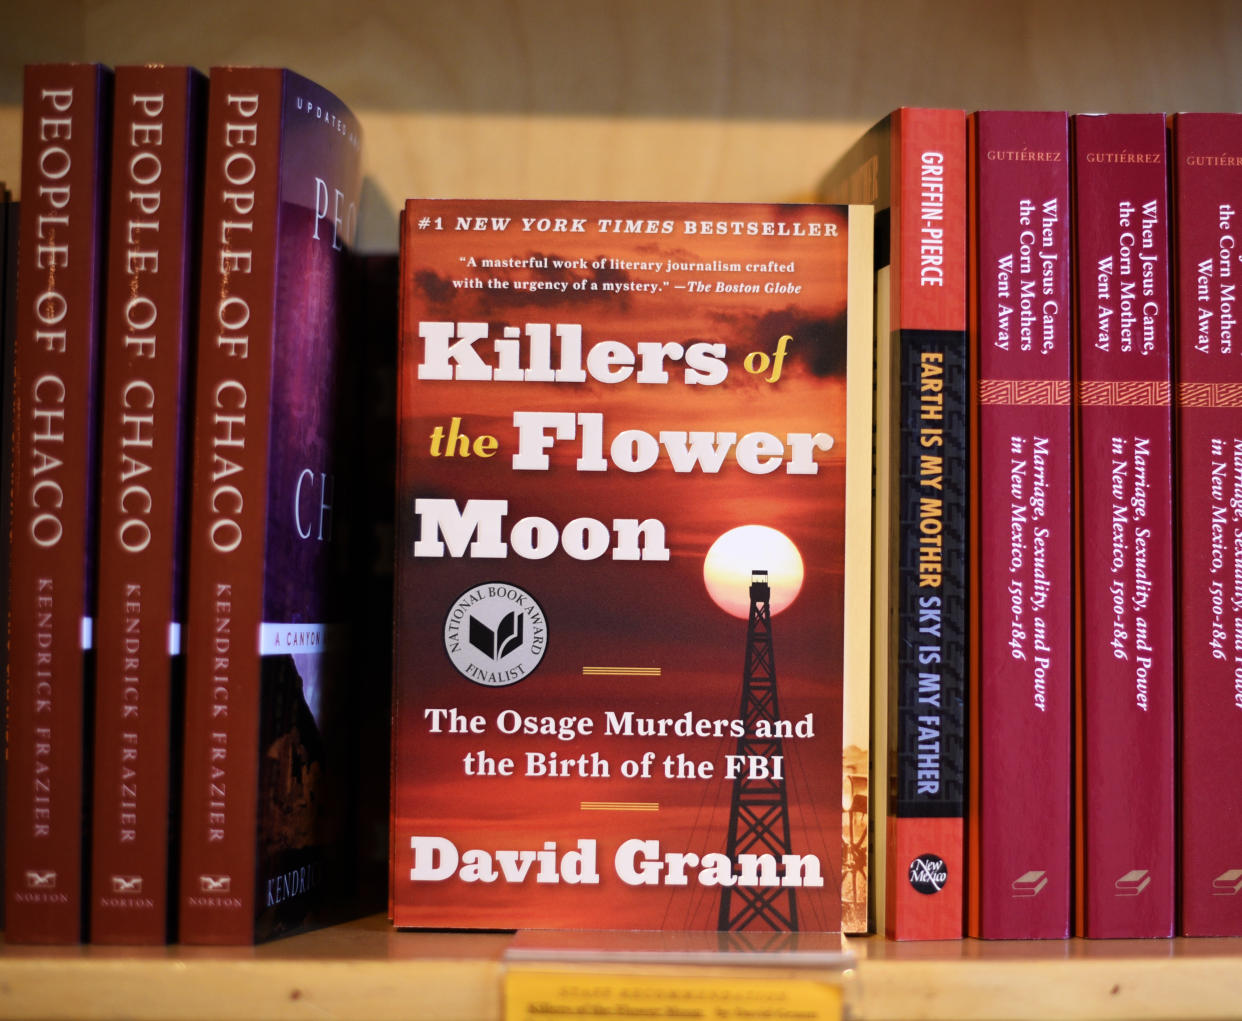 A copy of the best-selling 'Killers of the Flower Moon' by David Grann.